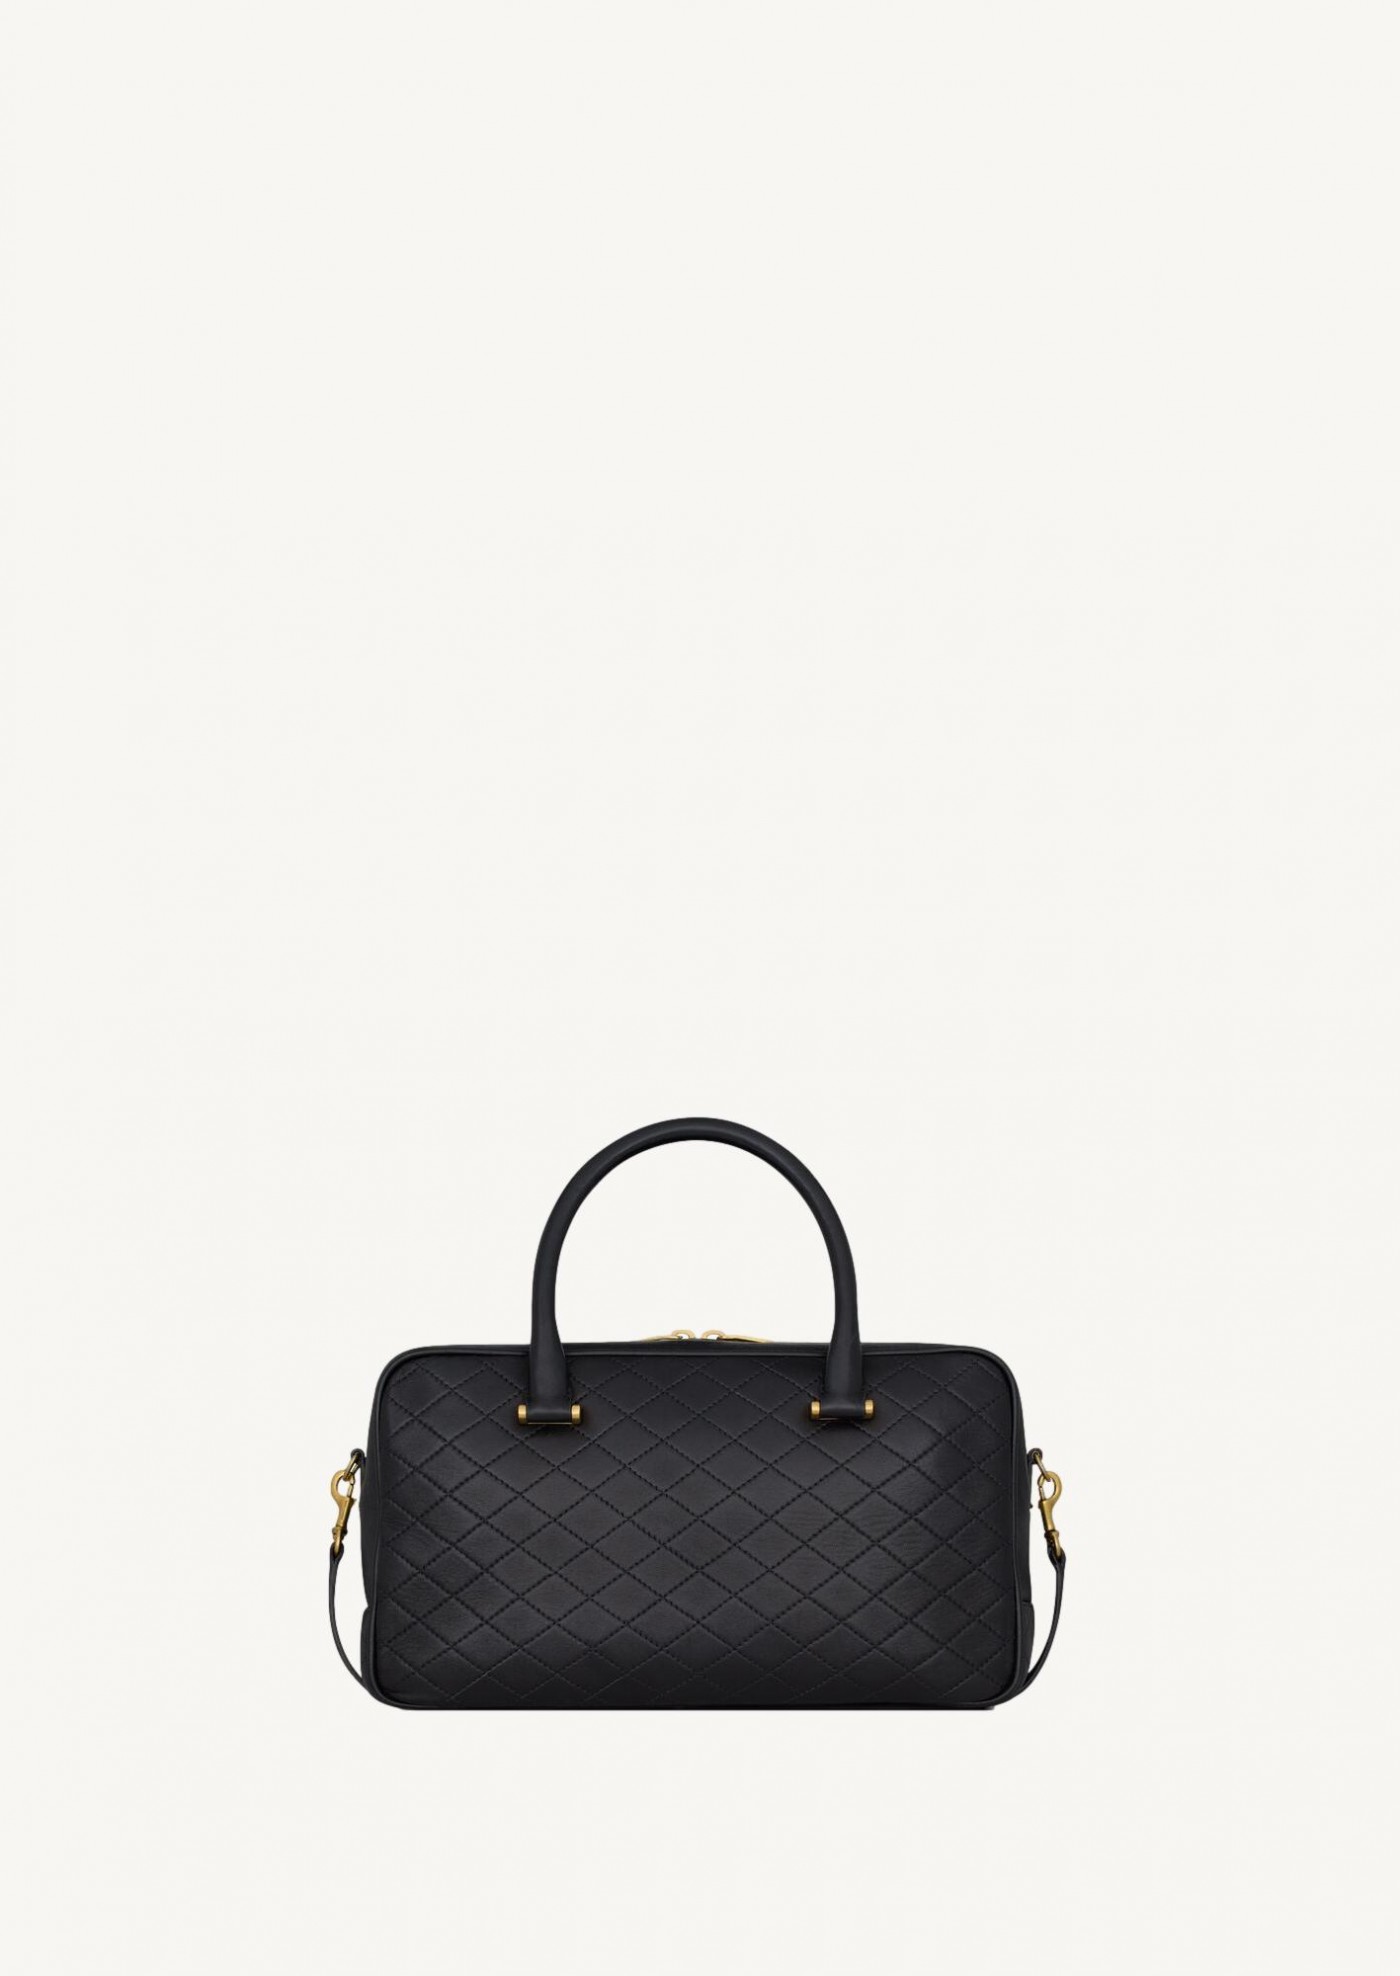 Lyia duffle in black quilted lambskin leather